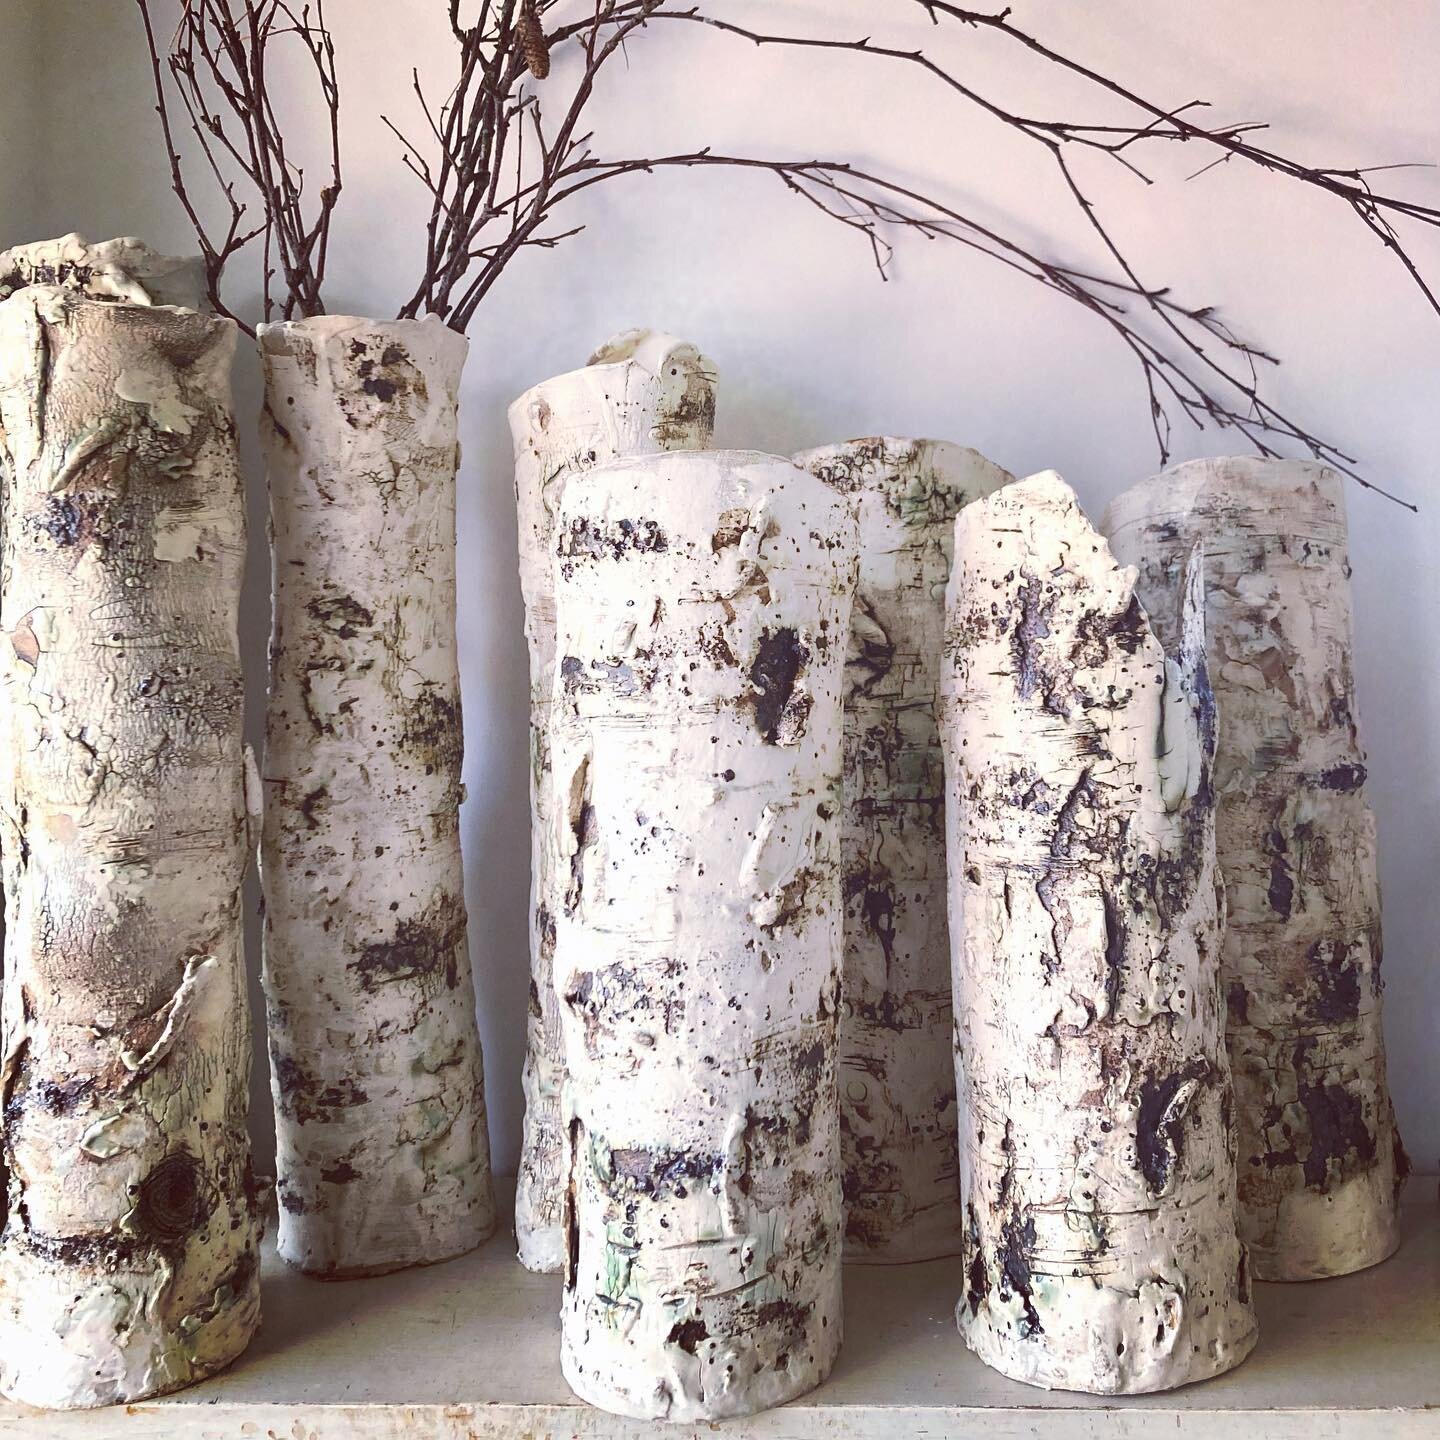 Silver Birch @ngsdevon middle well garden, near Totnes Sunday 7th May TQ9 6RL - pottery stall with these beauties plus more pottery @totnespotters Stunning 2acre garden and woodland walks  next to vineyard @sandridge_barton #bankholidayweekend #whats